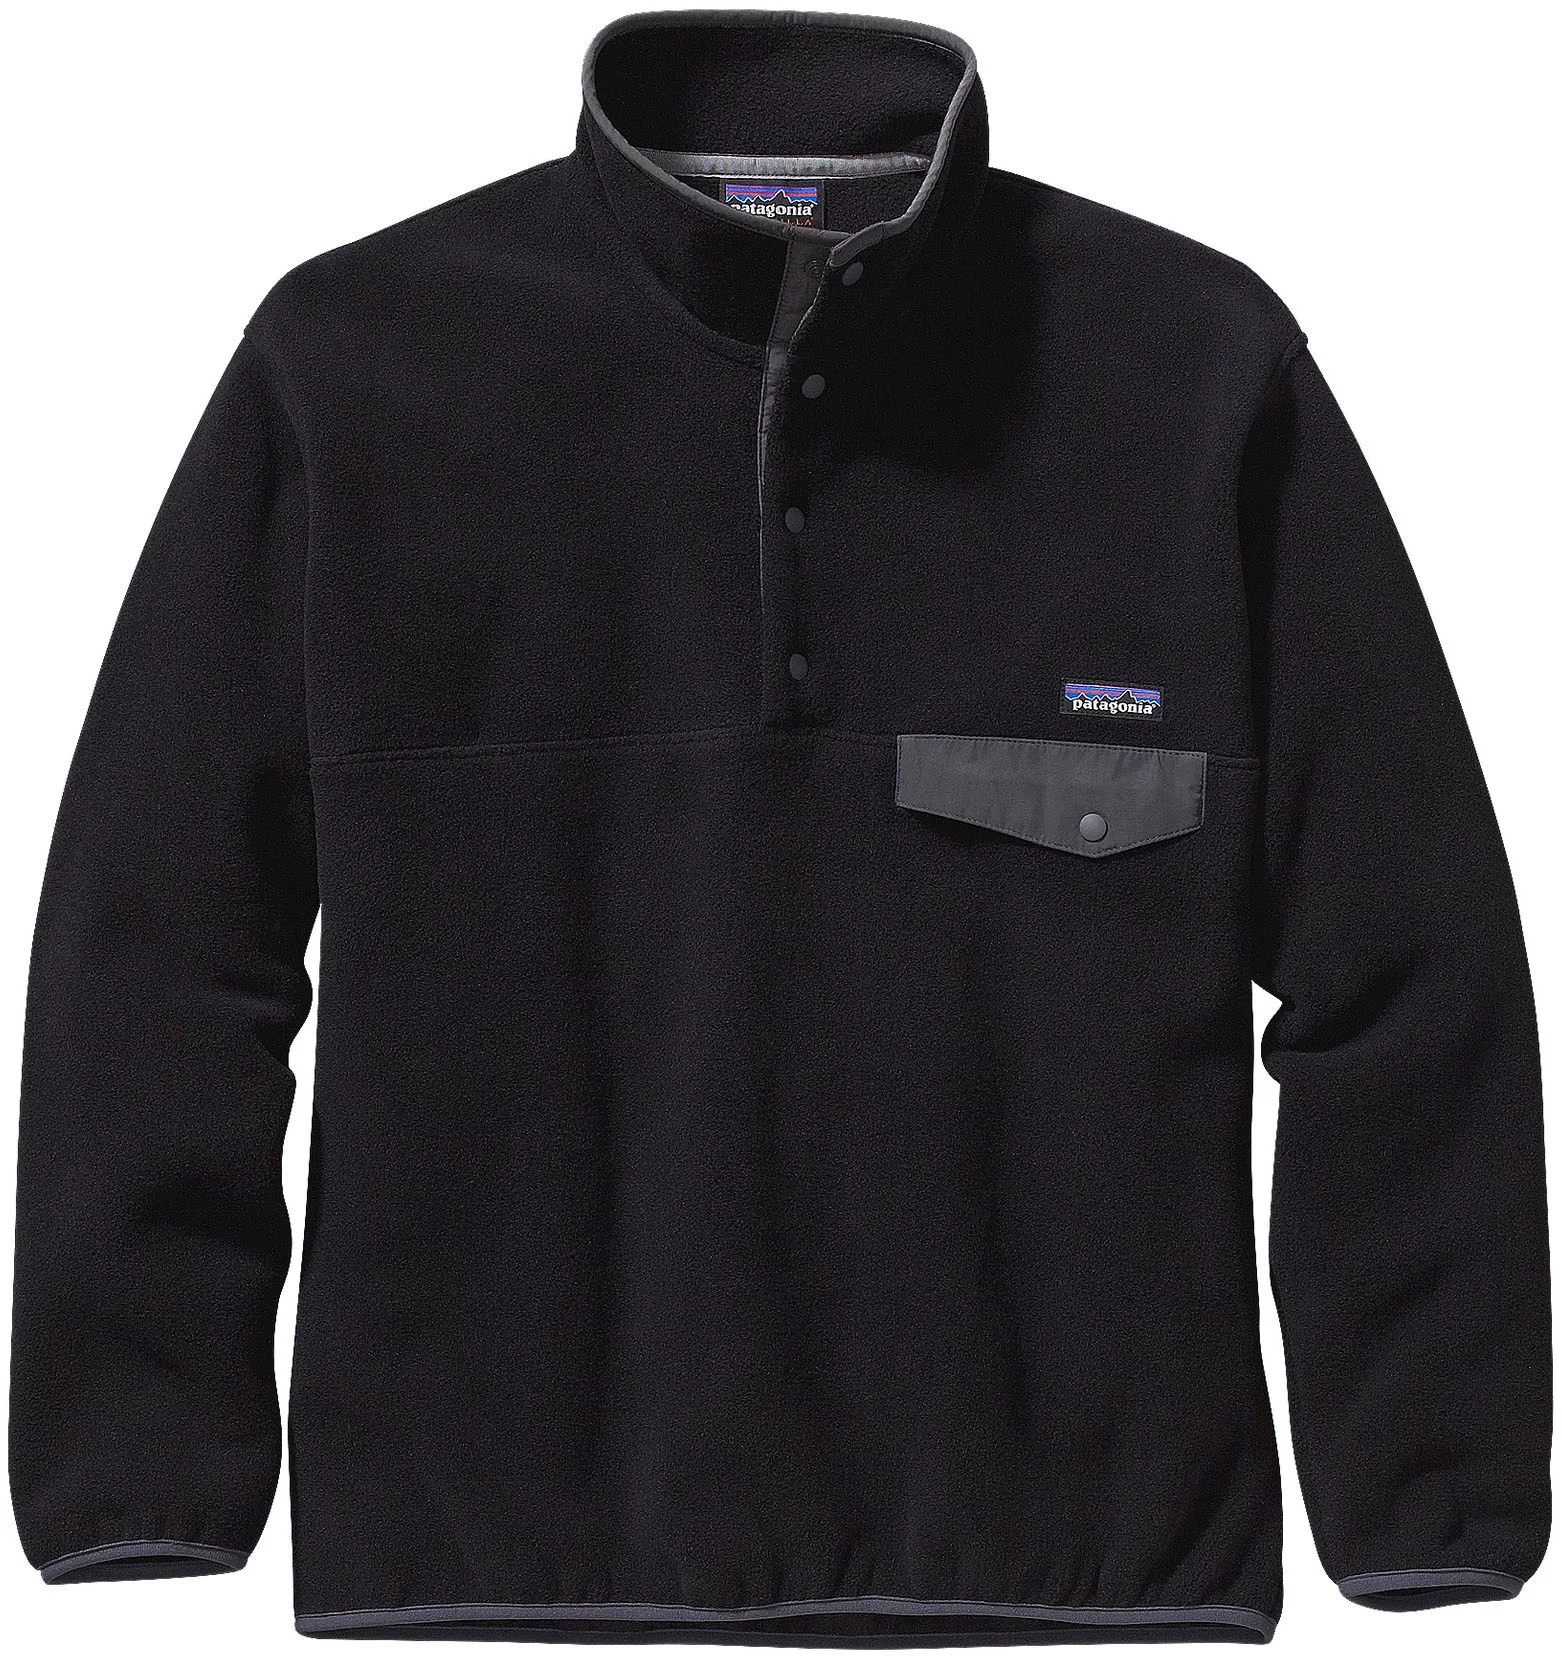 T Pullover Fleece - Patagonia Synchilla Snap - Black / Forge Grey   clothing box office-accessories eyewear caps 40-5 - AspennigeriaShops